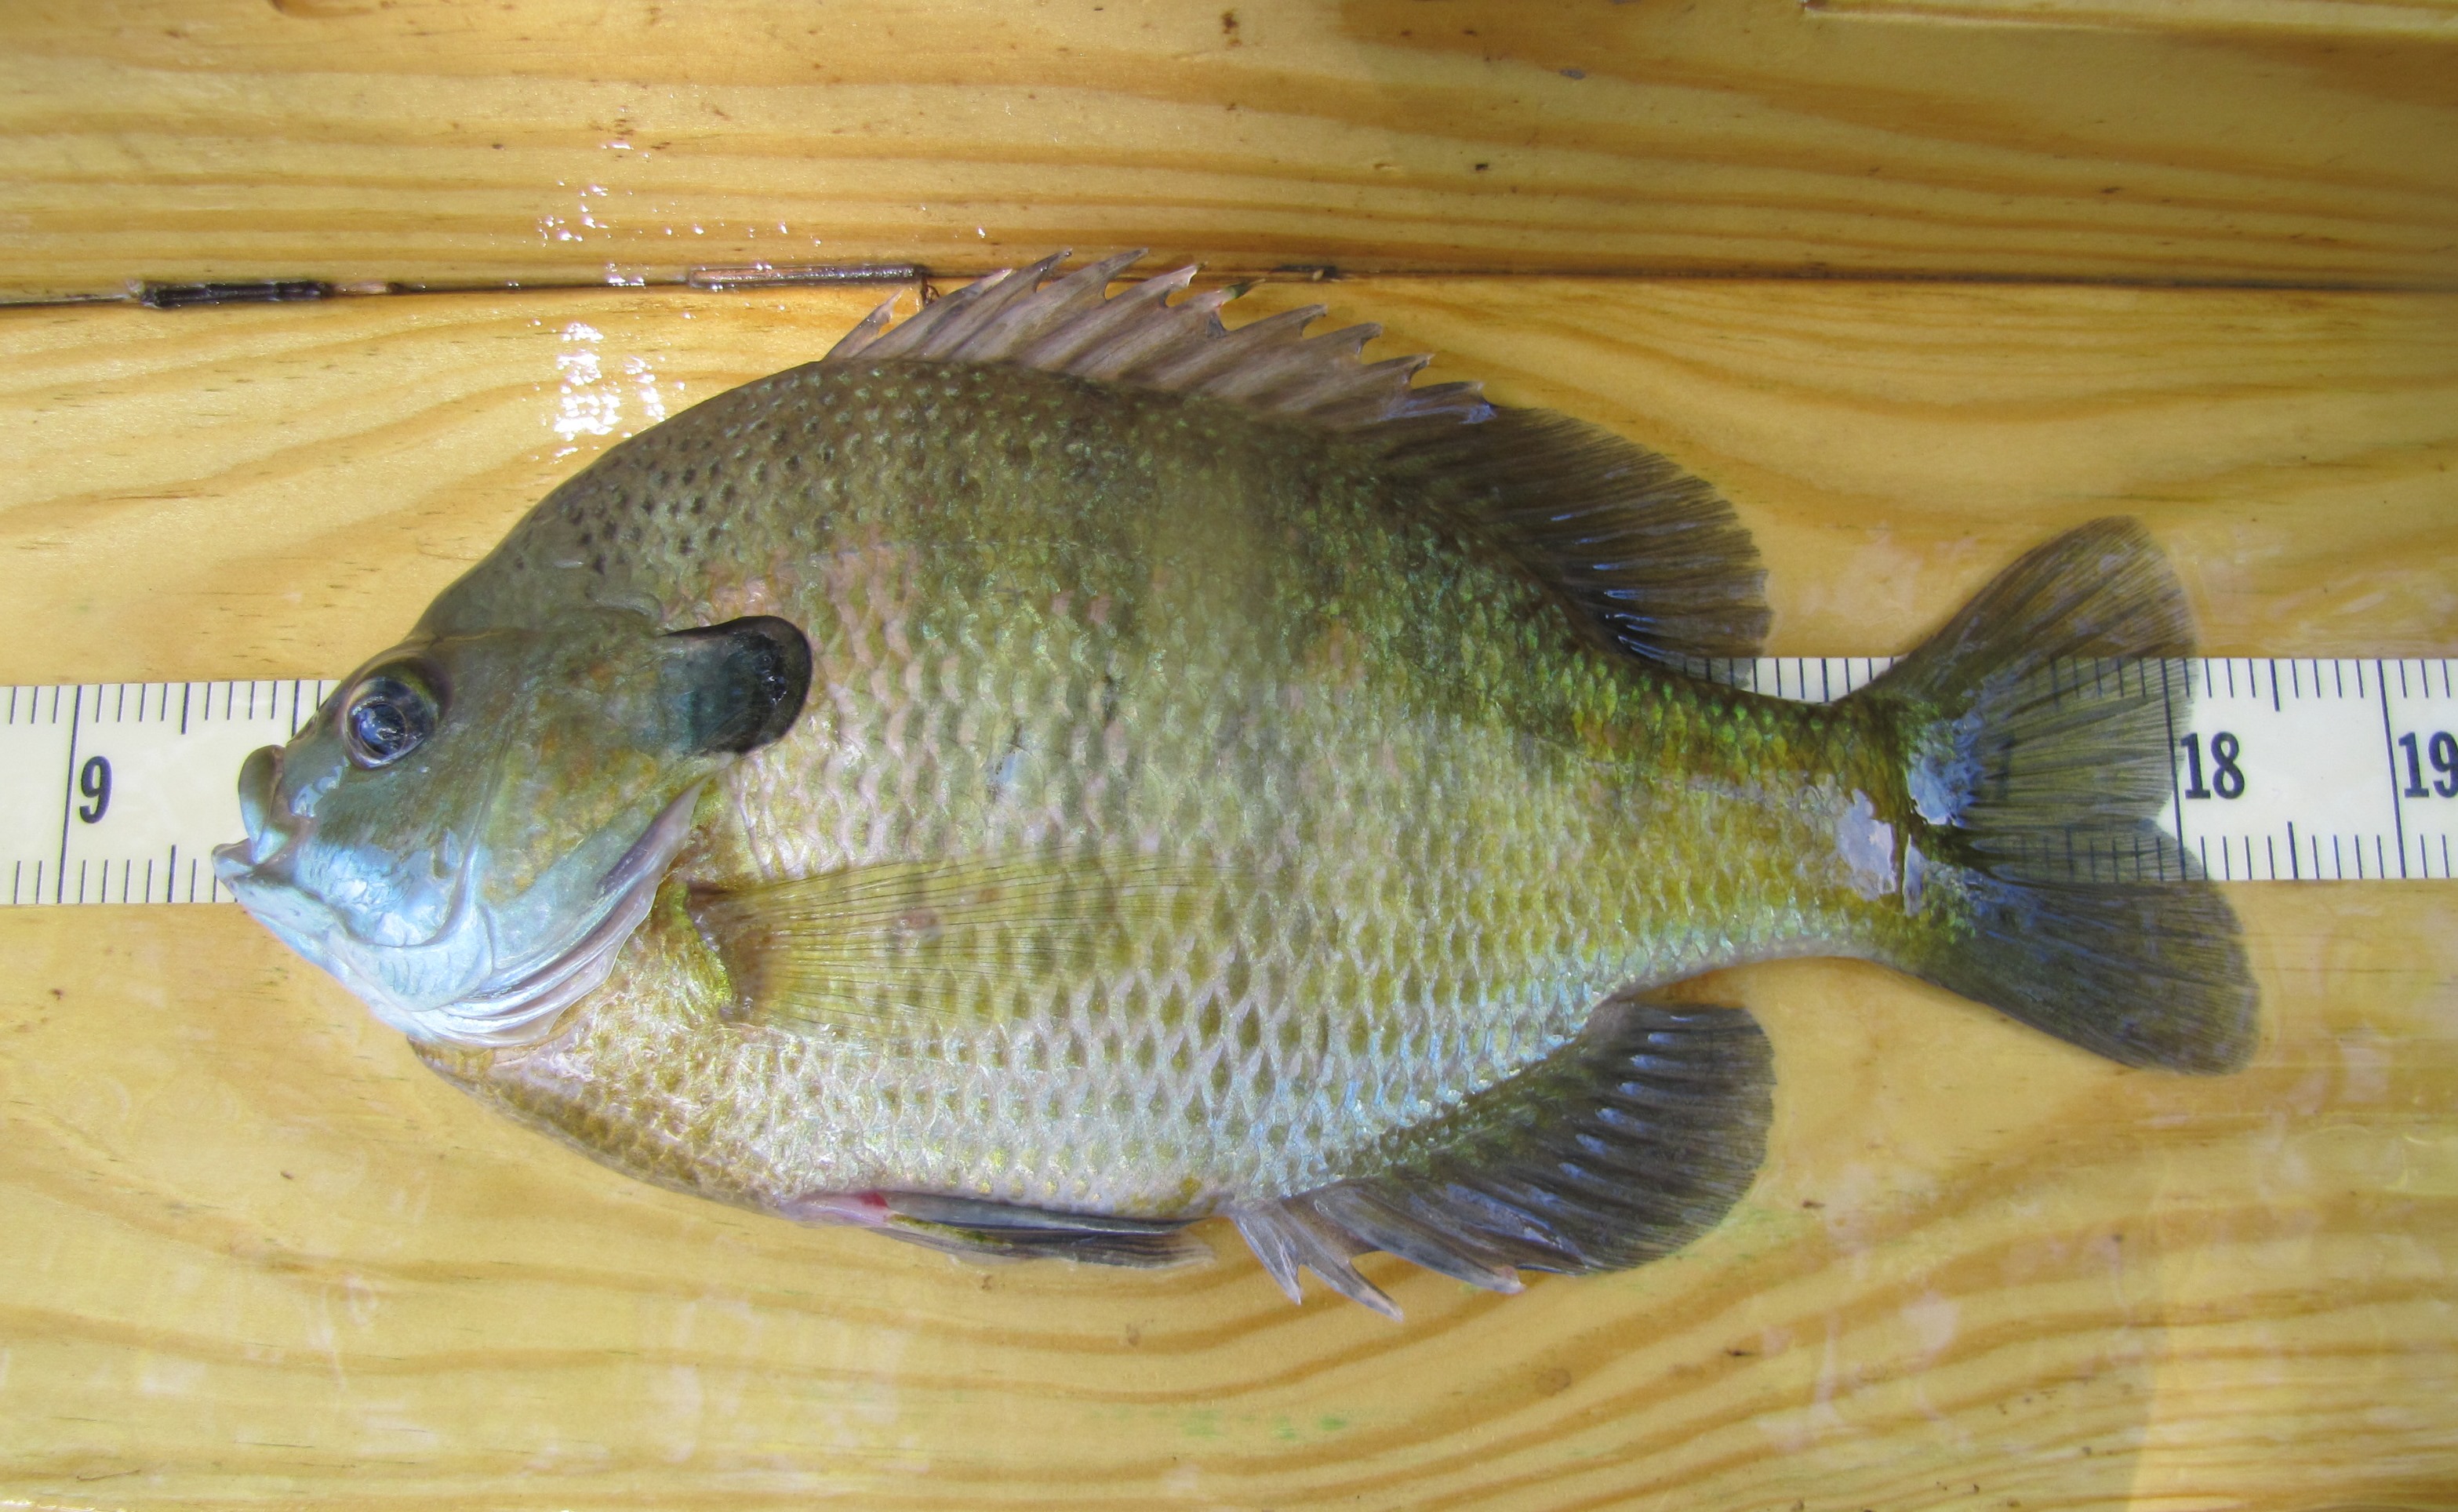 Quality bluegill are present in the pooled sections of the South Fork Licking River.